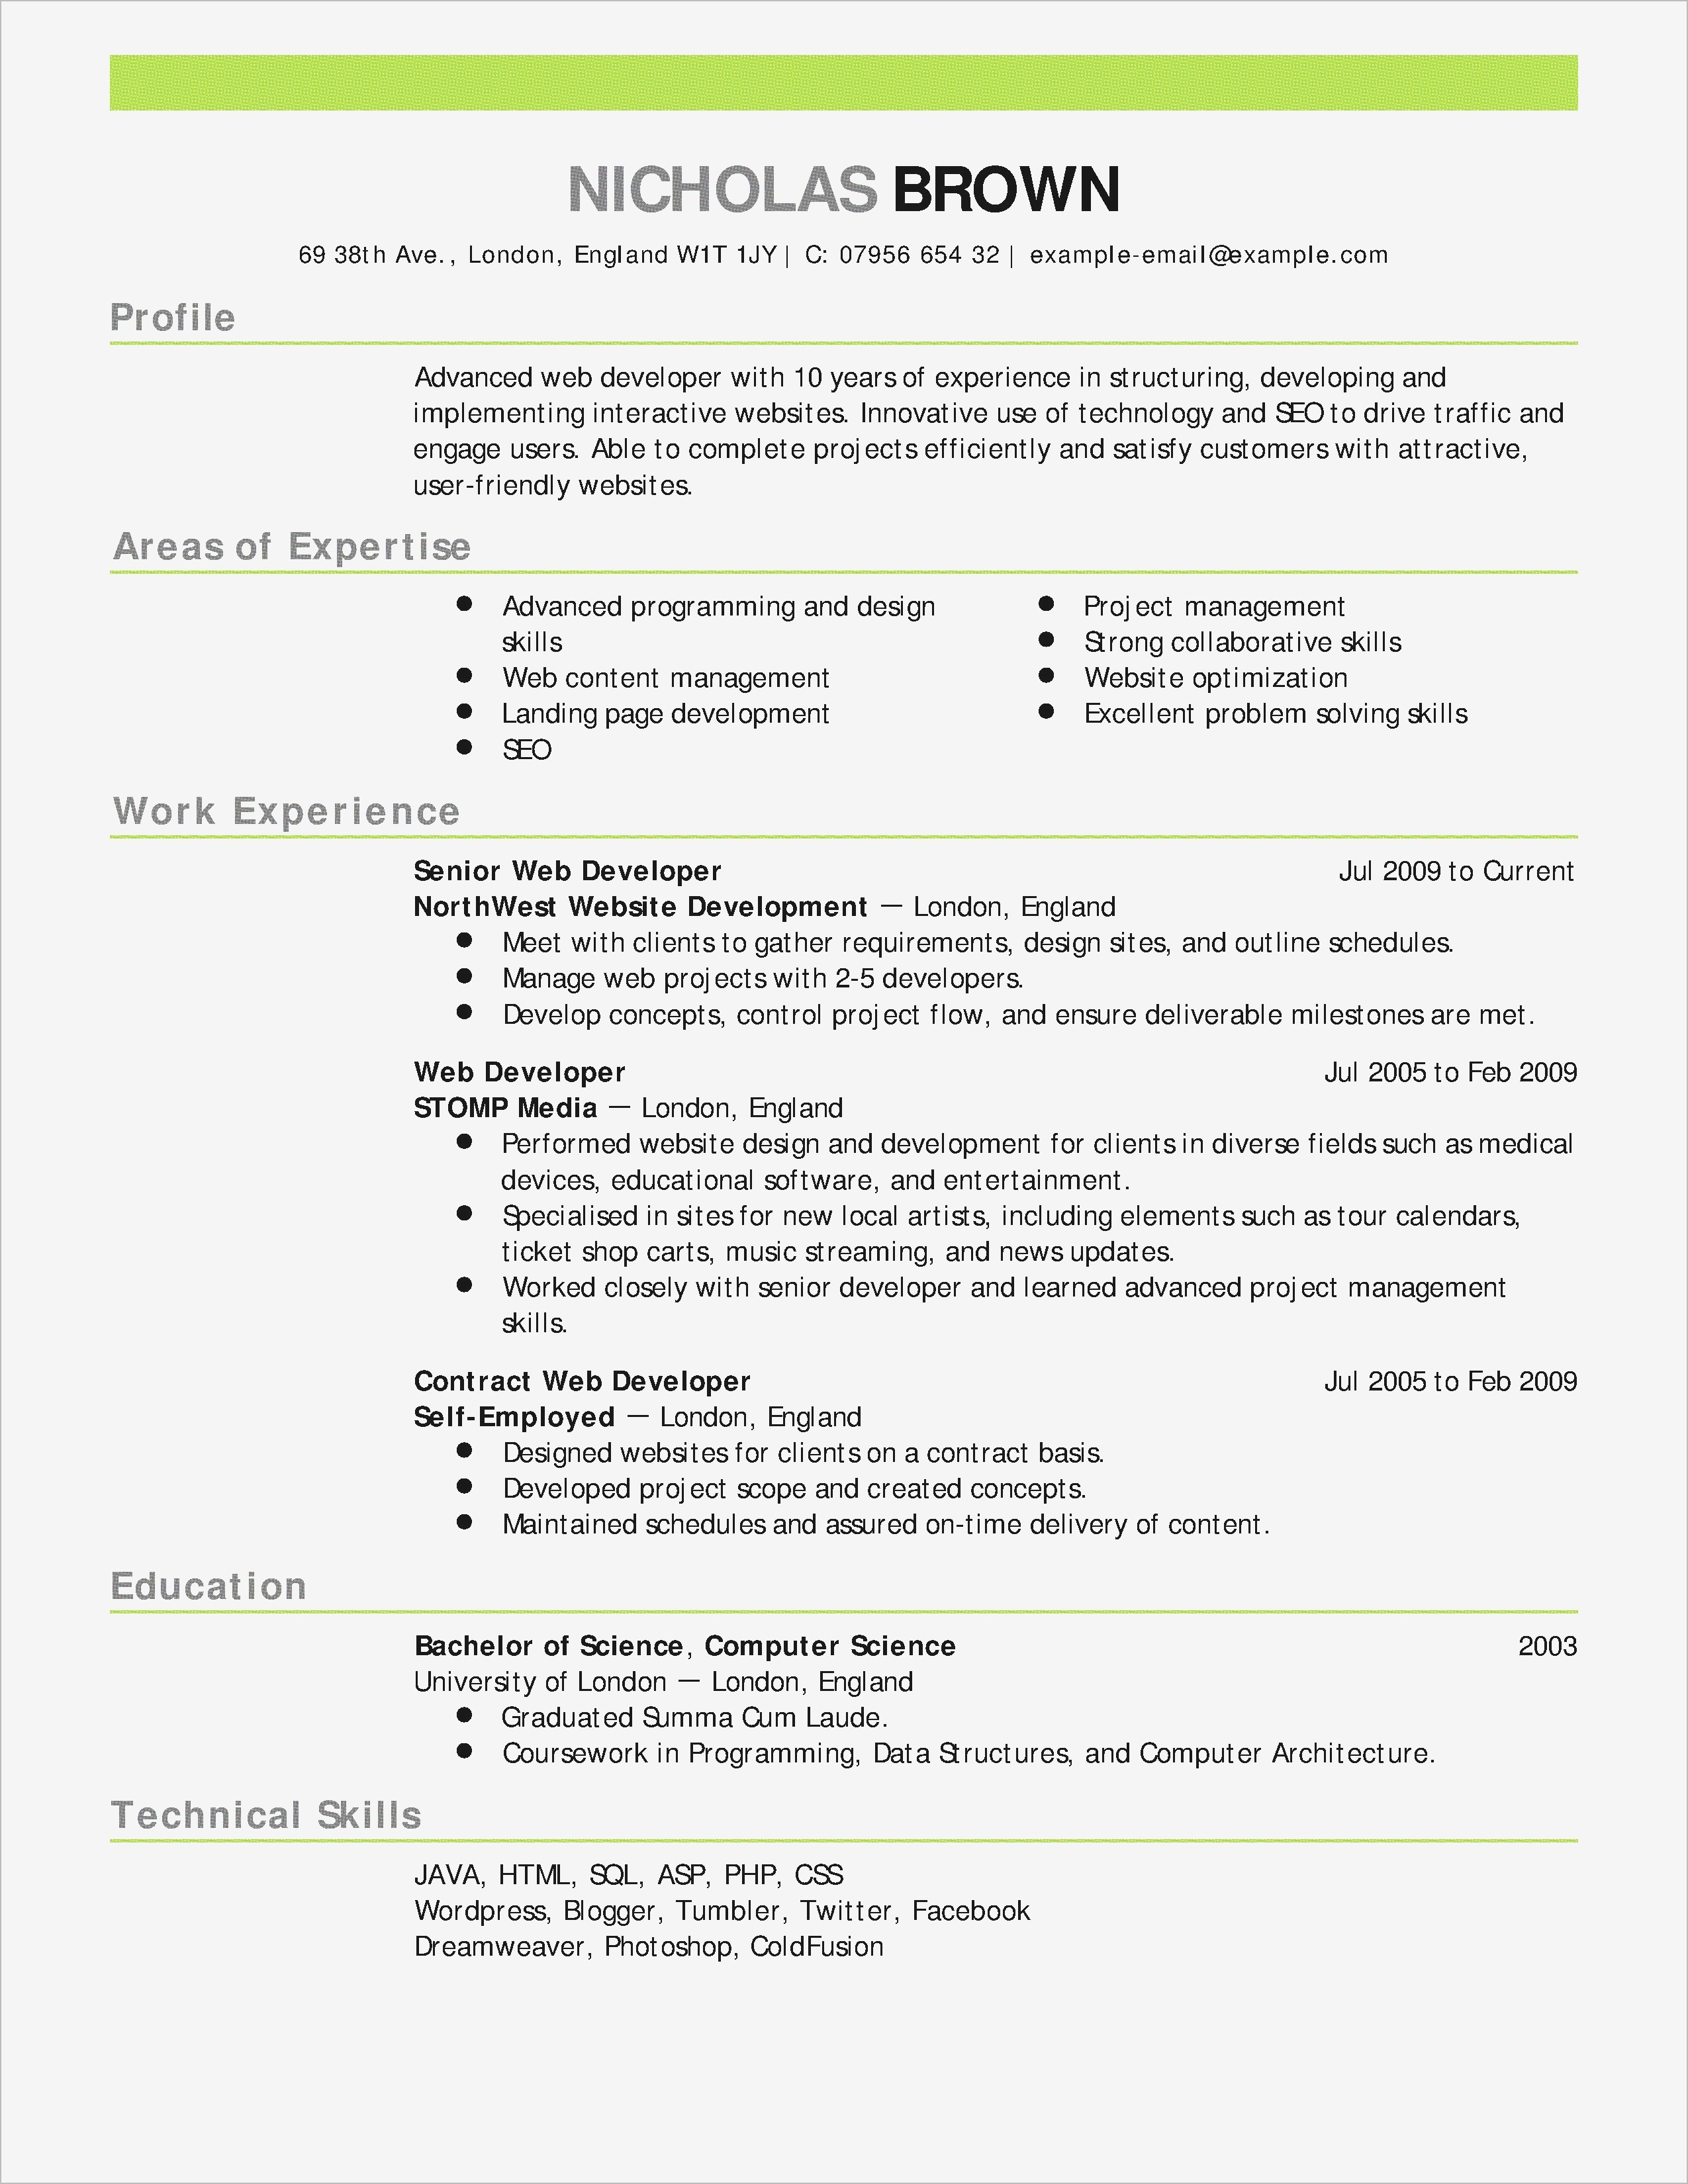 Email Template for Letter Of Recommendation - How to format A Job Resume Reference Luxury Examples Resumes